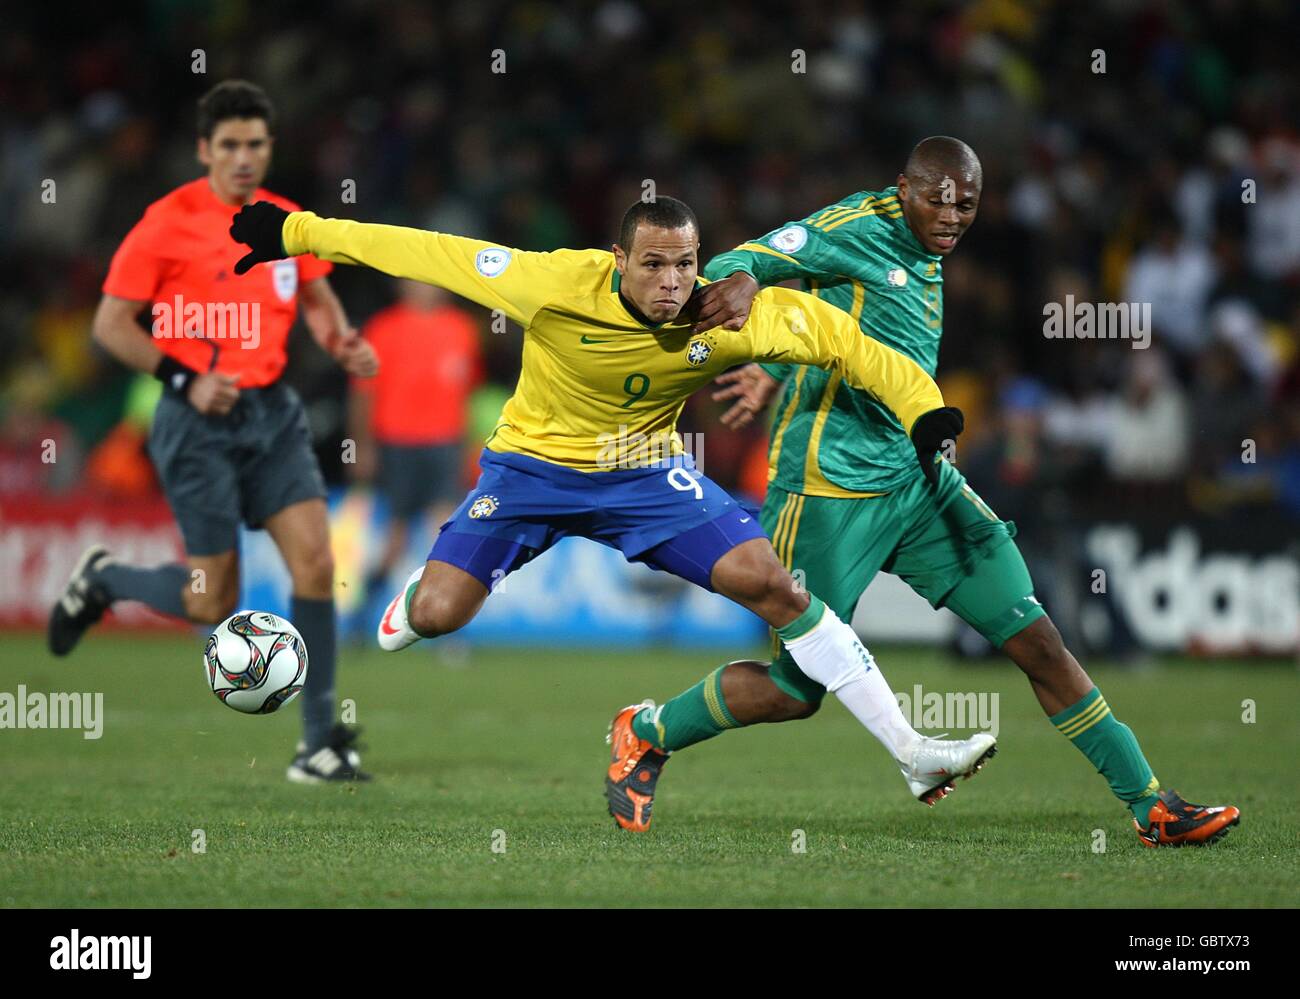 Soccer - 2009 FIFA Confederations Cup - Semi Finals - Brazil v South Africa - Ellis Park. Brazil's Luis Fabiano (left) and South Africa's Kagisho Evidence Dikgacoi (right) battle for the ball Stock Photo